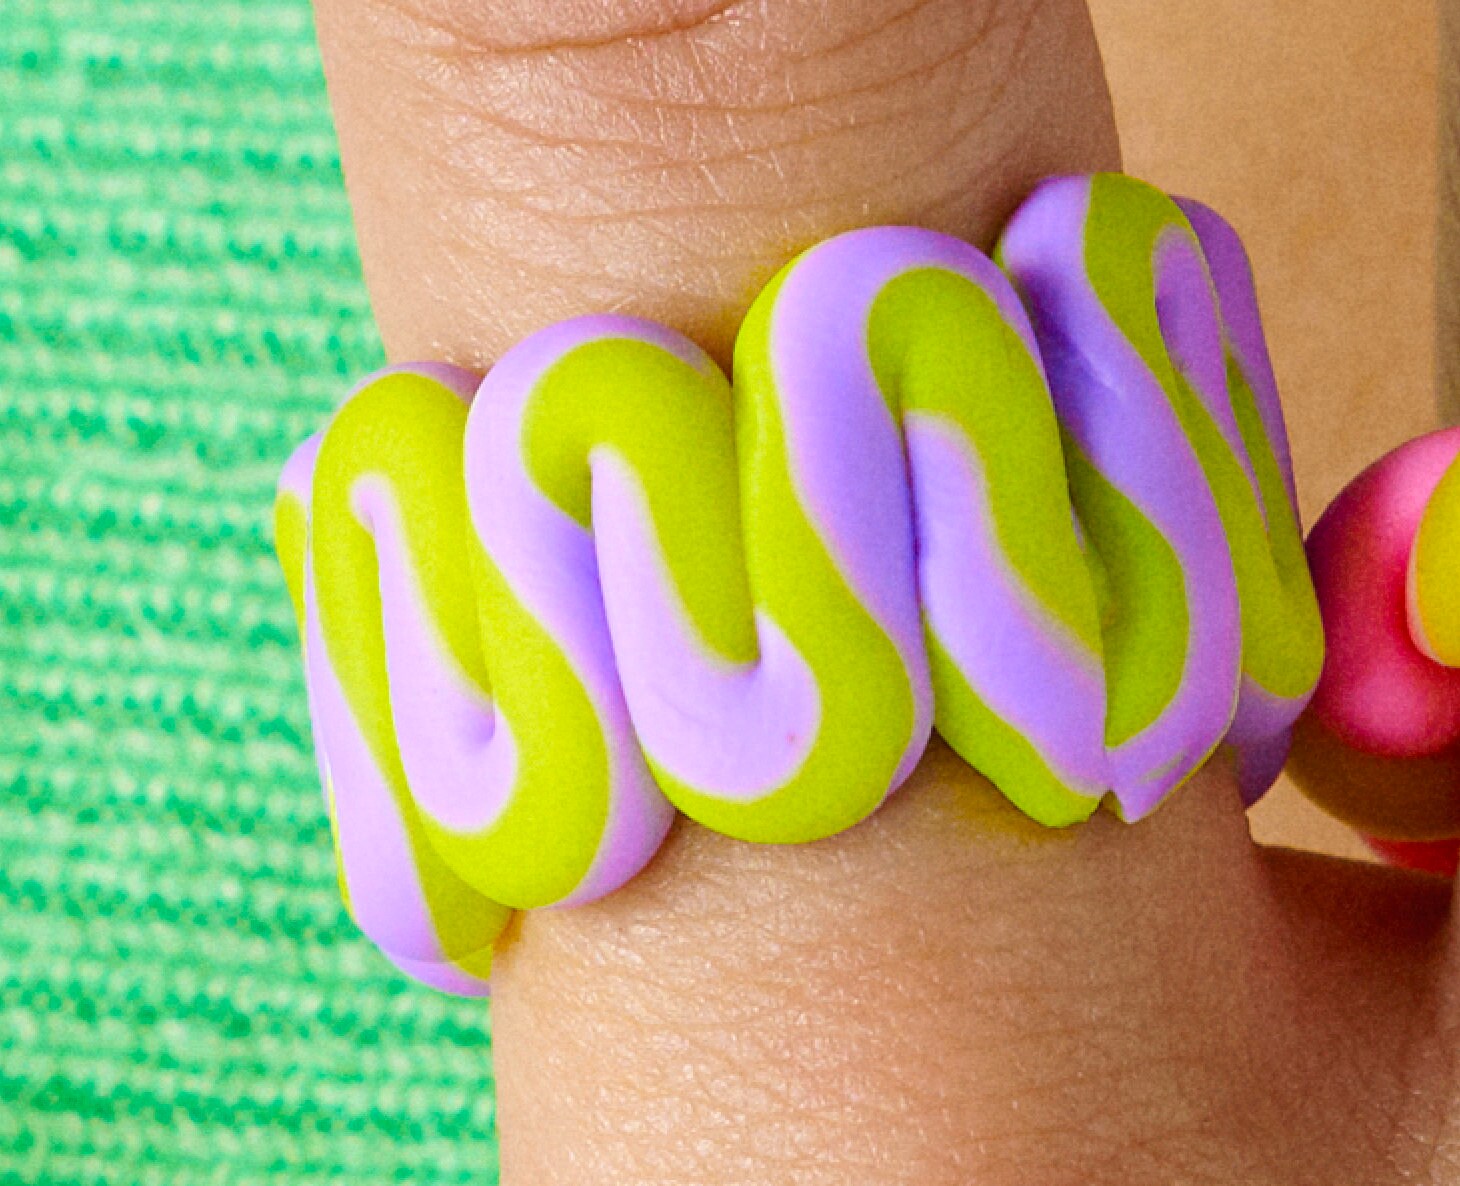 The Candy Colored Rings | Super Instagrammable Handmade Finger Rings | Handmade Clay Rings in Candy Colors | Goose Taffy